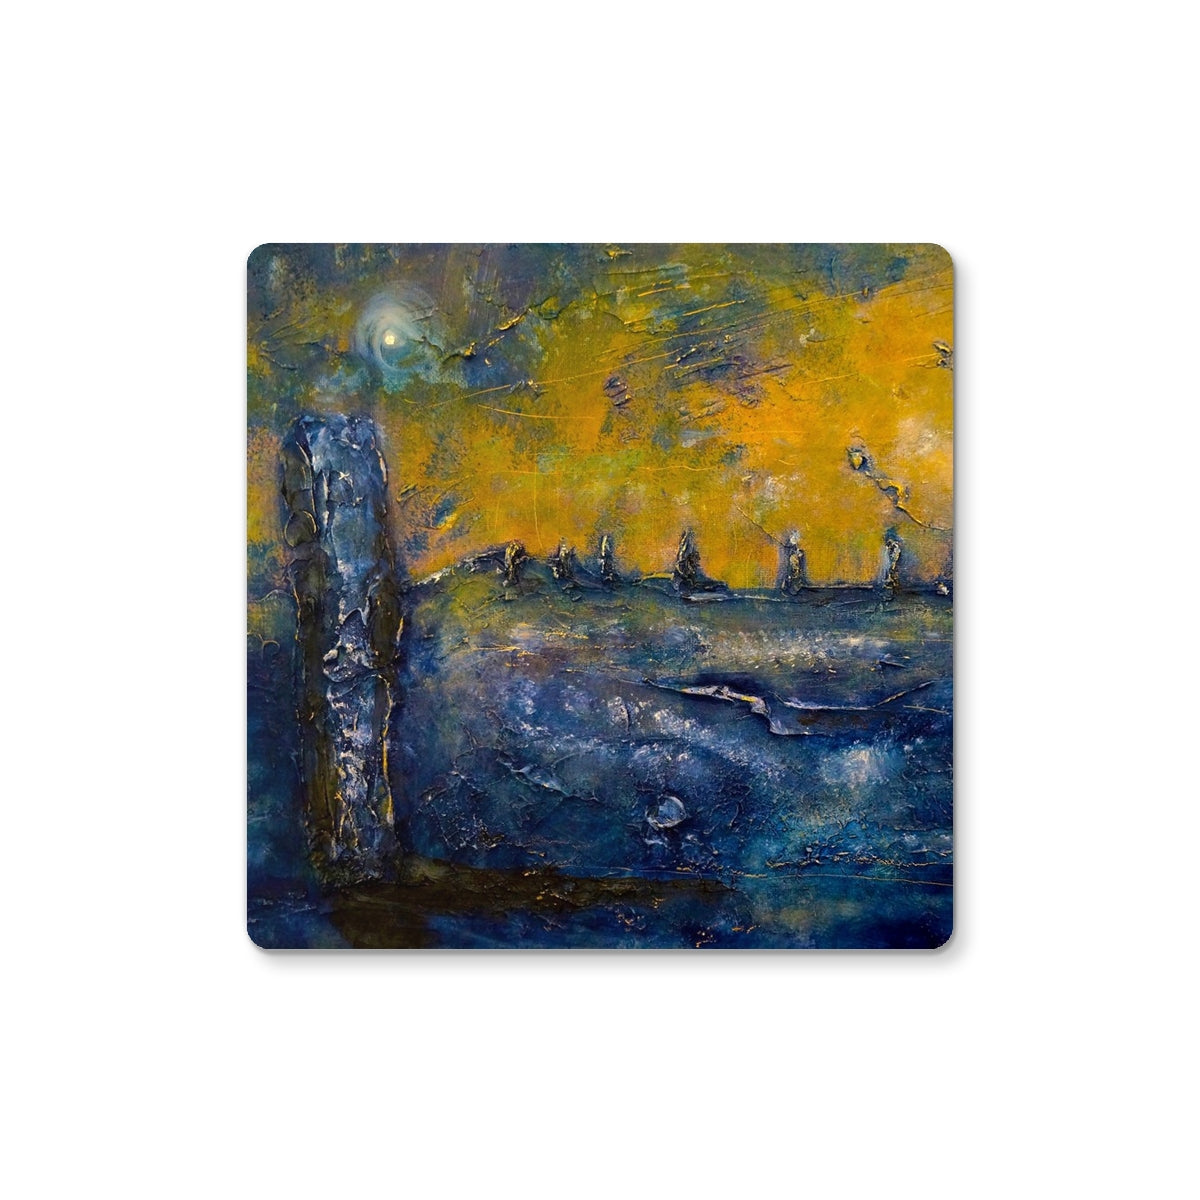 Brodgar Moonlight Orkney Art Gifts Coaster-Coasters-Orkney Art Gallery-4 Coasters-Paintings, Prints, Homeware, Art Gifts From Scotland By Scottish Artist Kevin Hunter